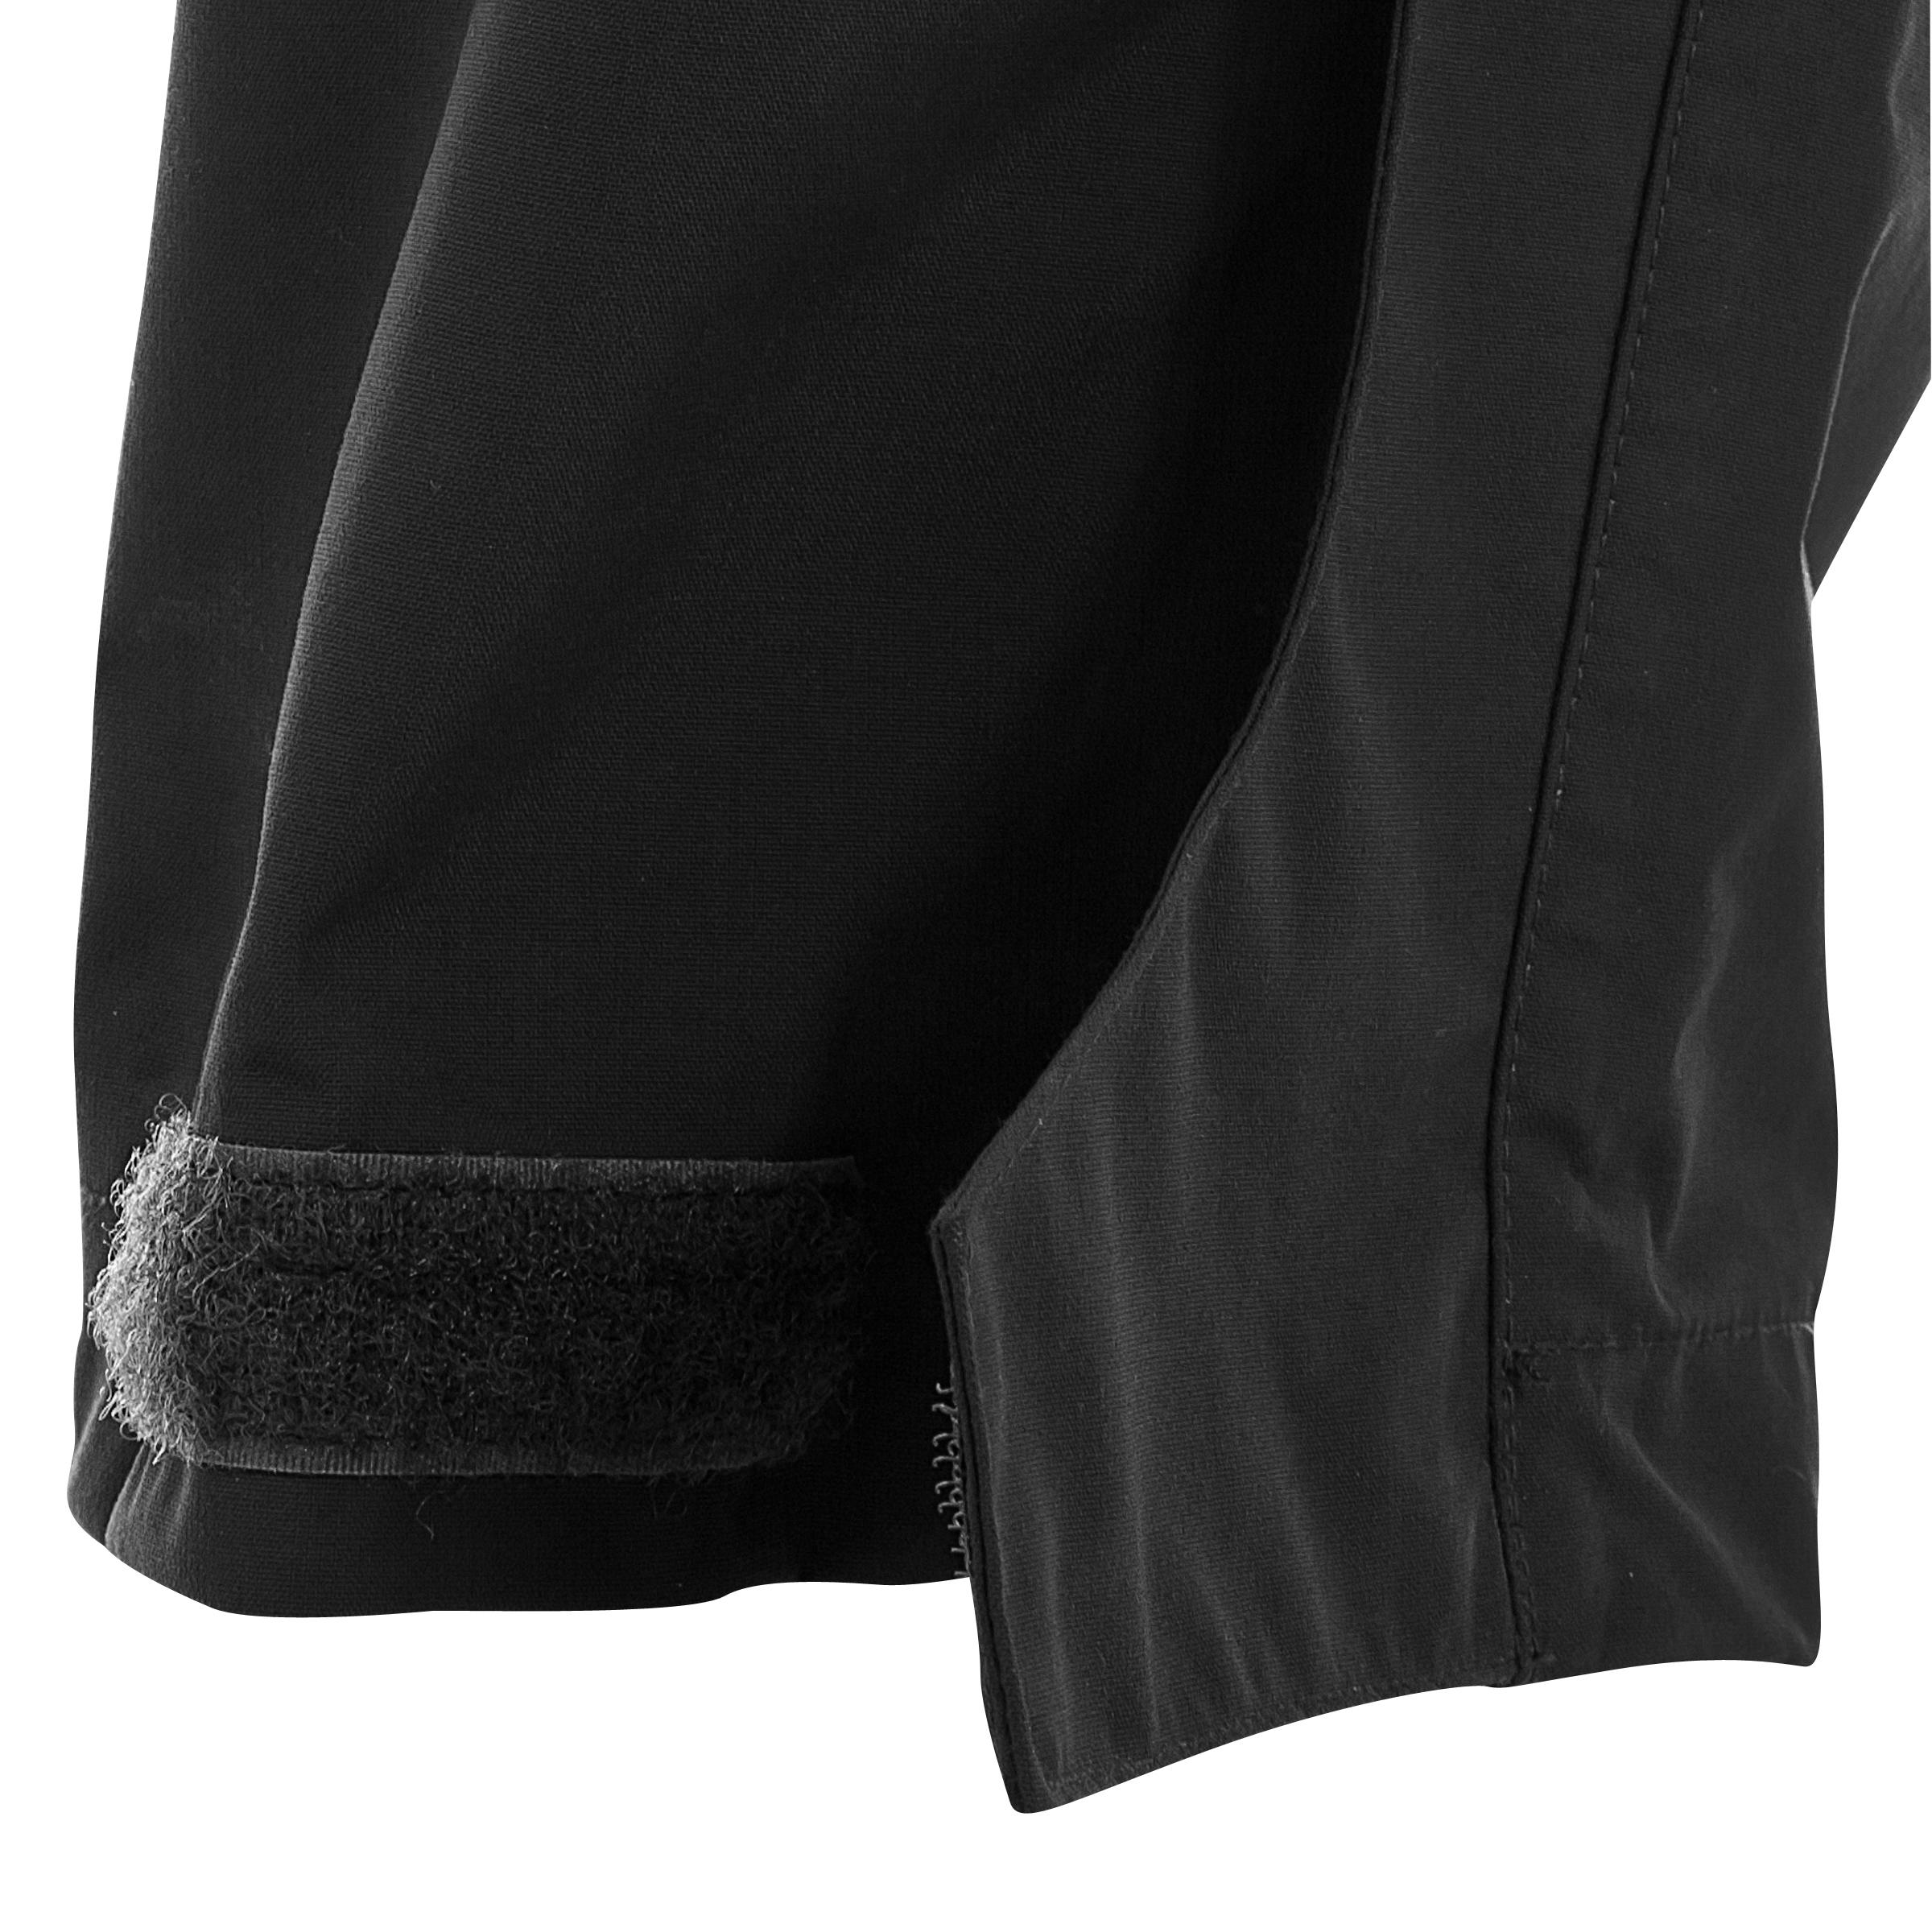 500 Adult 2-in1 Waterproof Horse Riding Overtrousers - Black 13/14